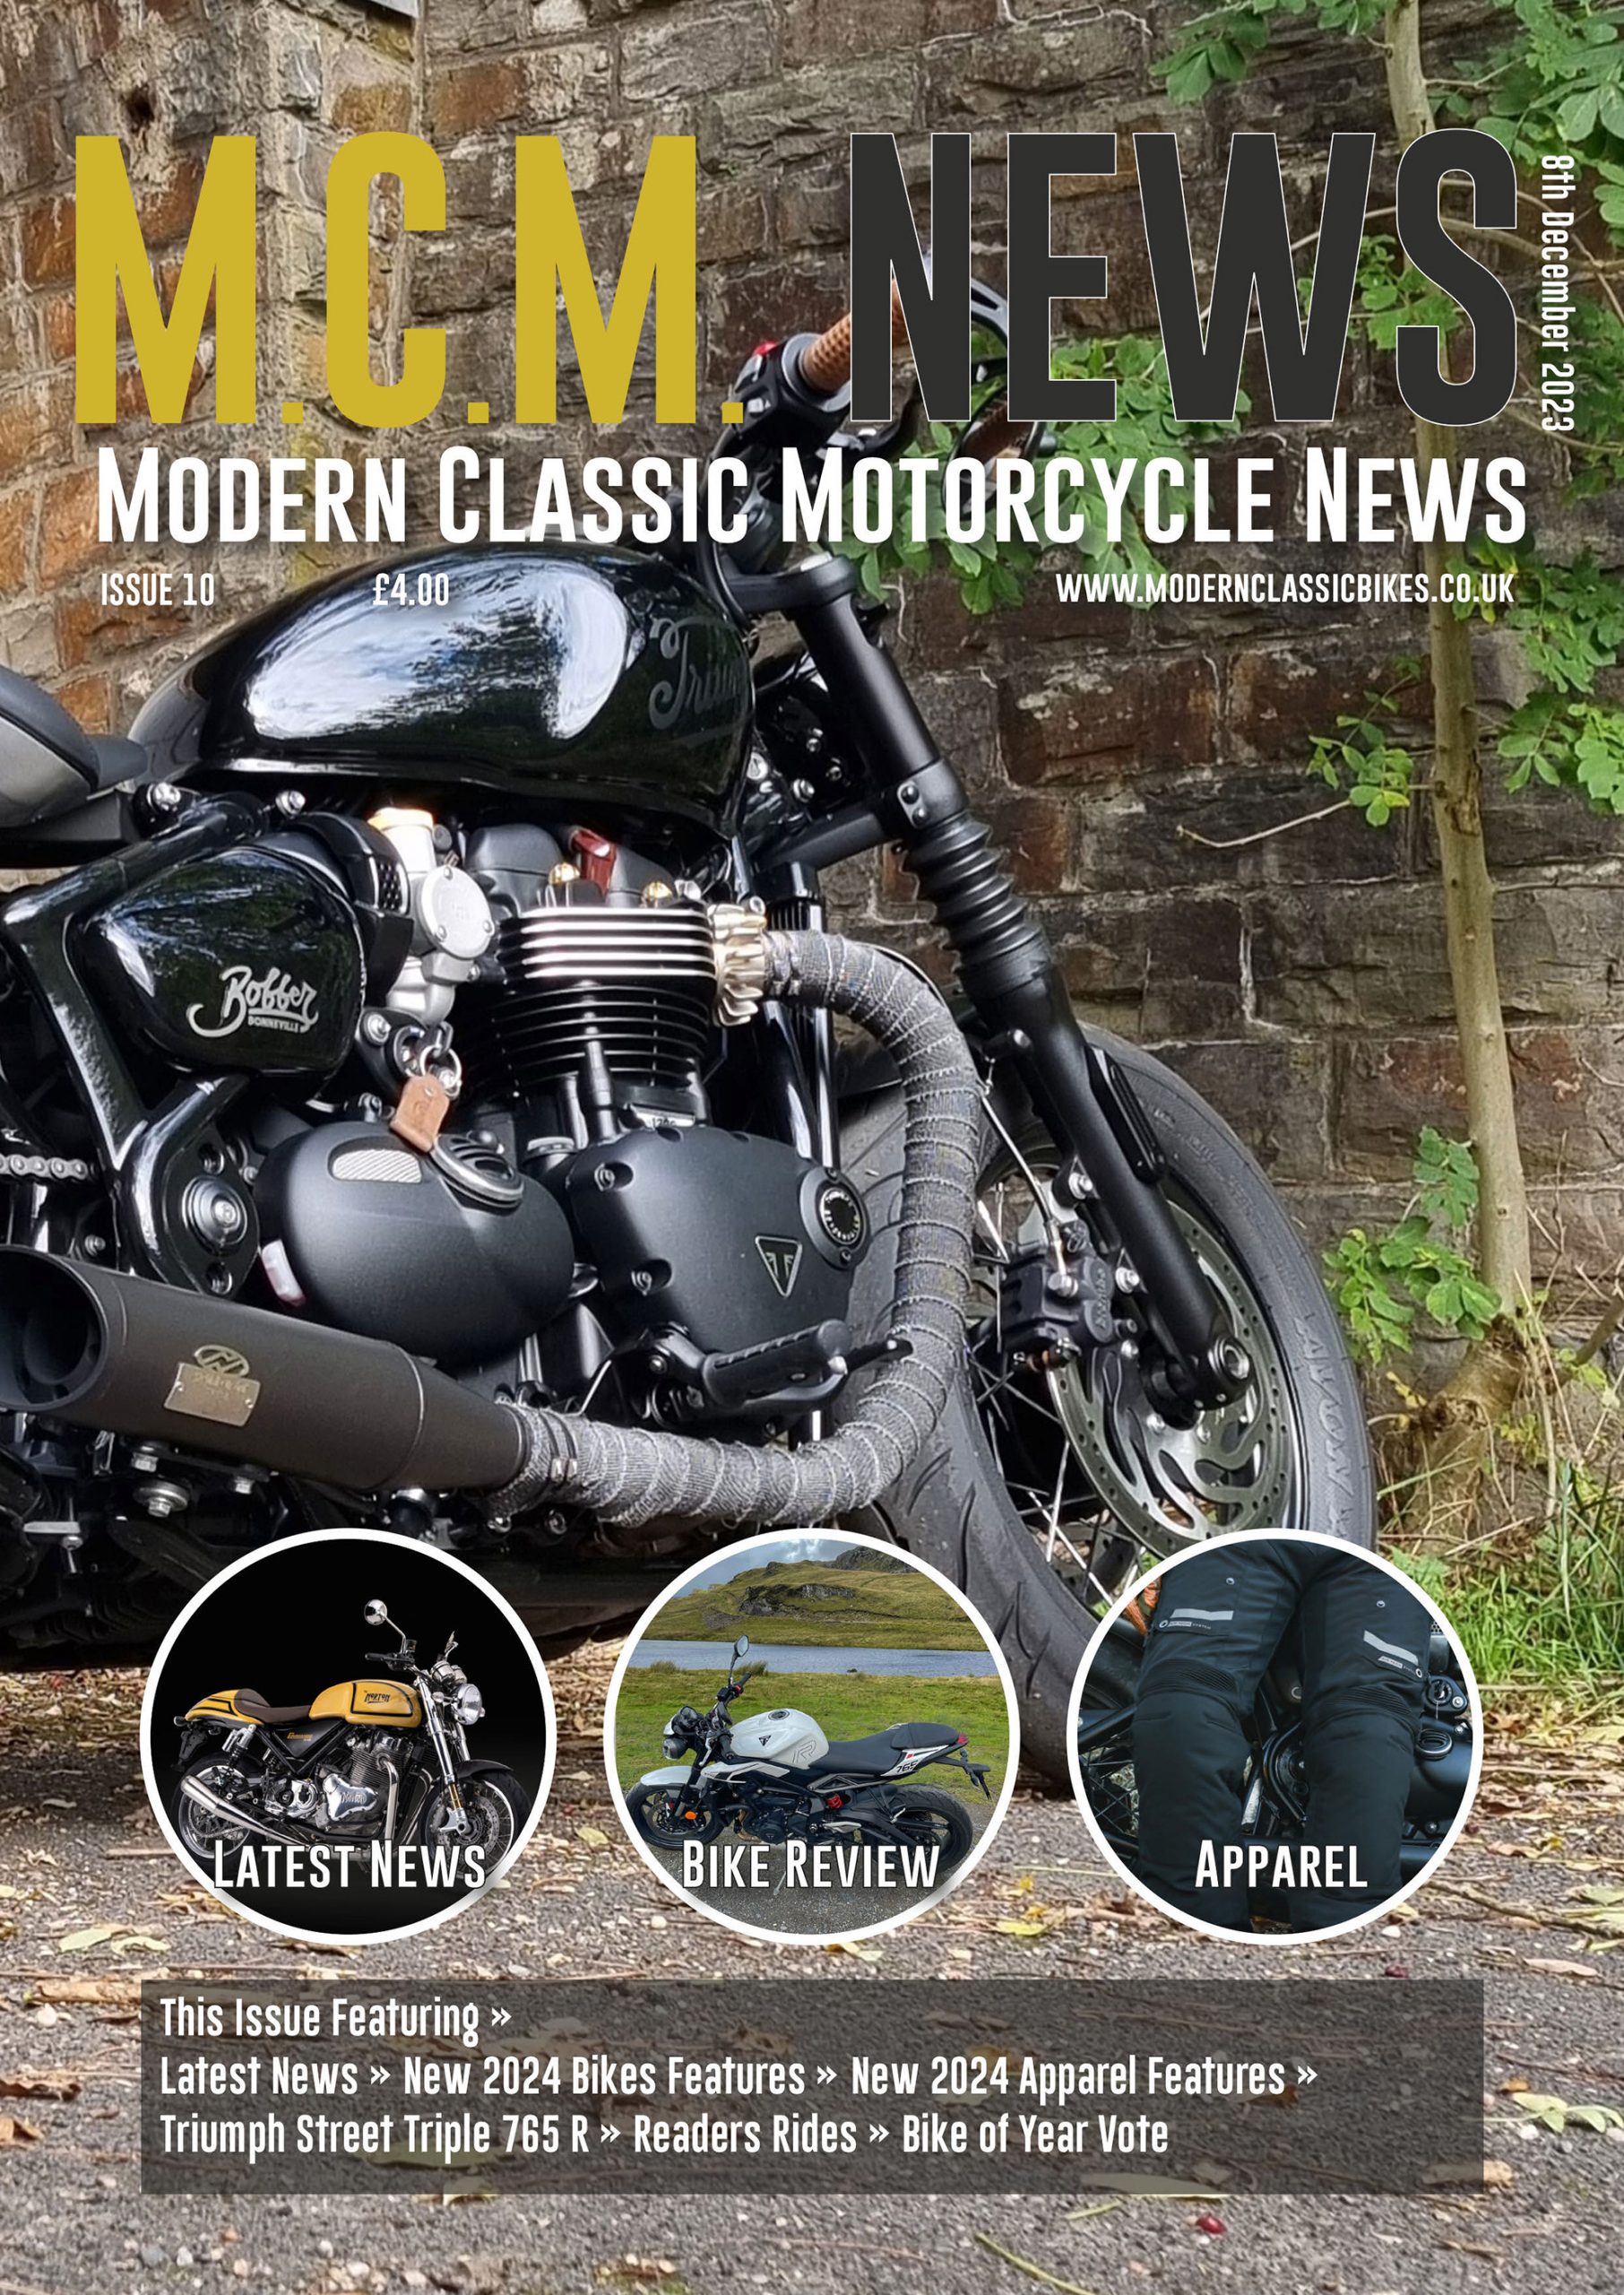 Modern Classic Motorcycle News - Issue 10 Out Now